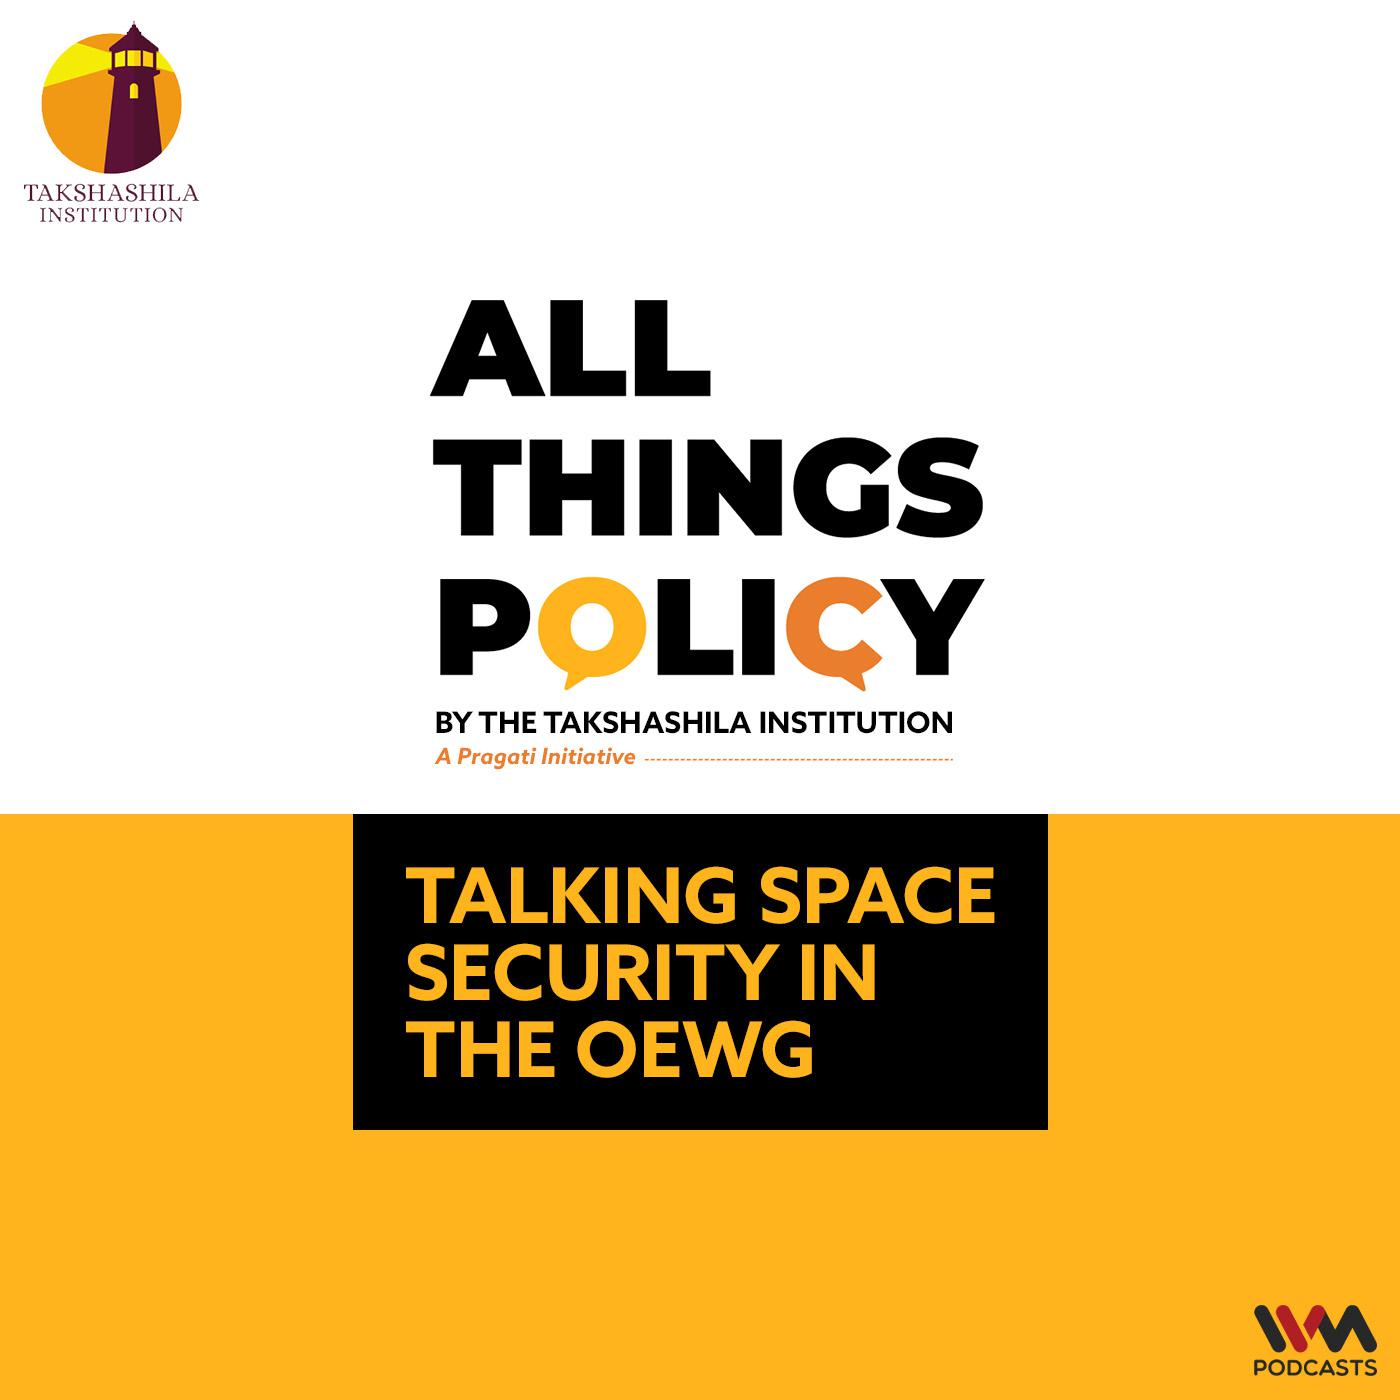 Talking Space Security in the OEWG